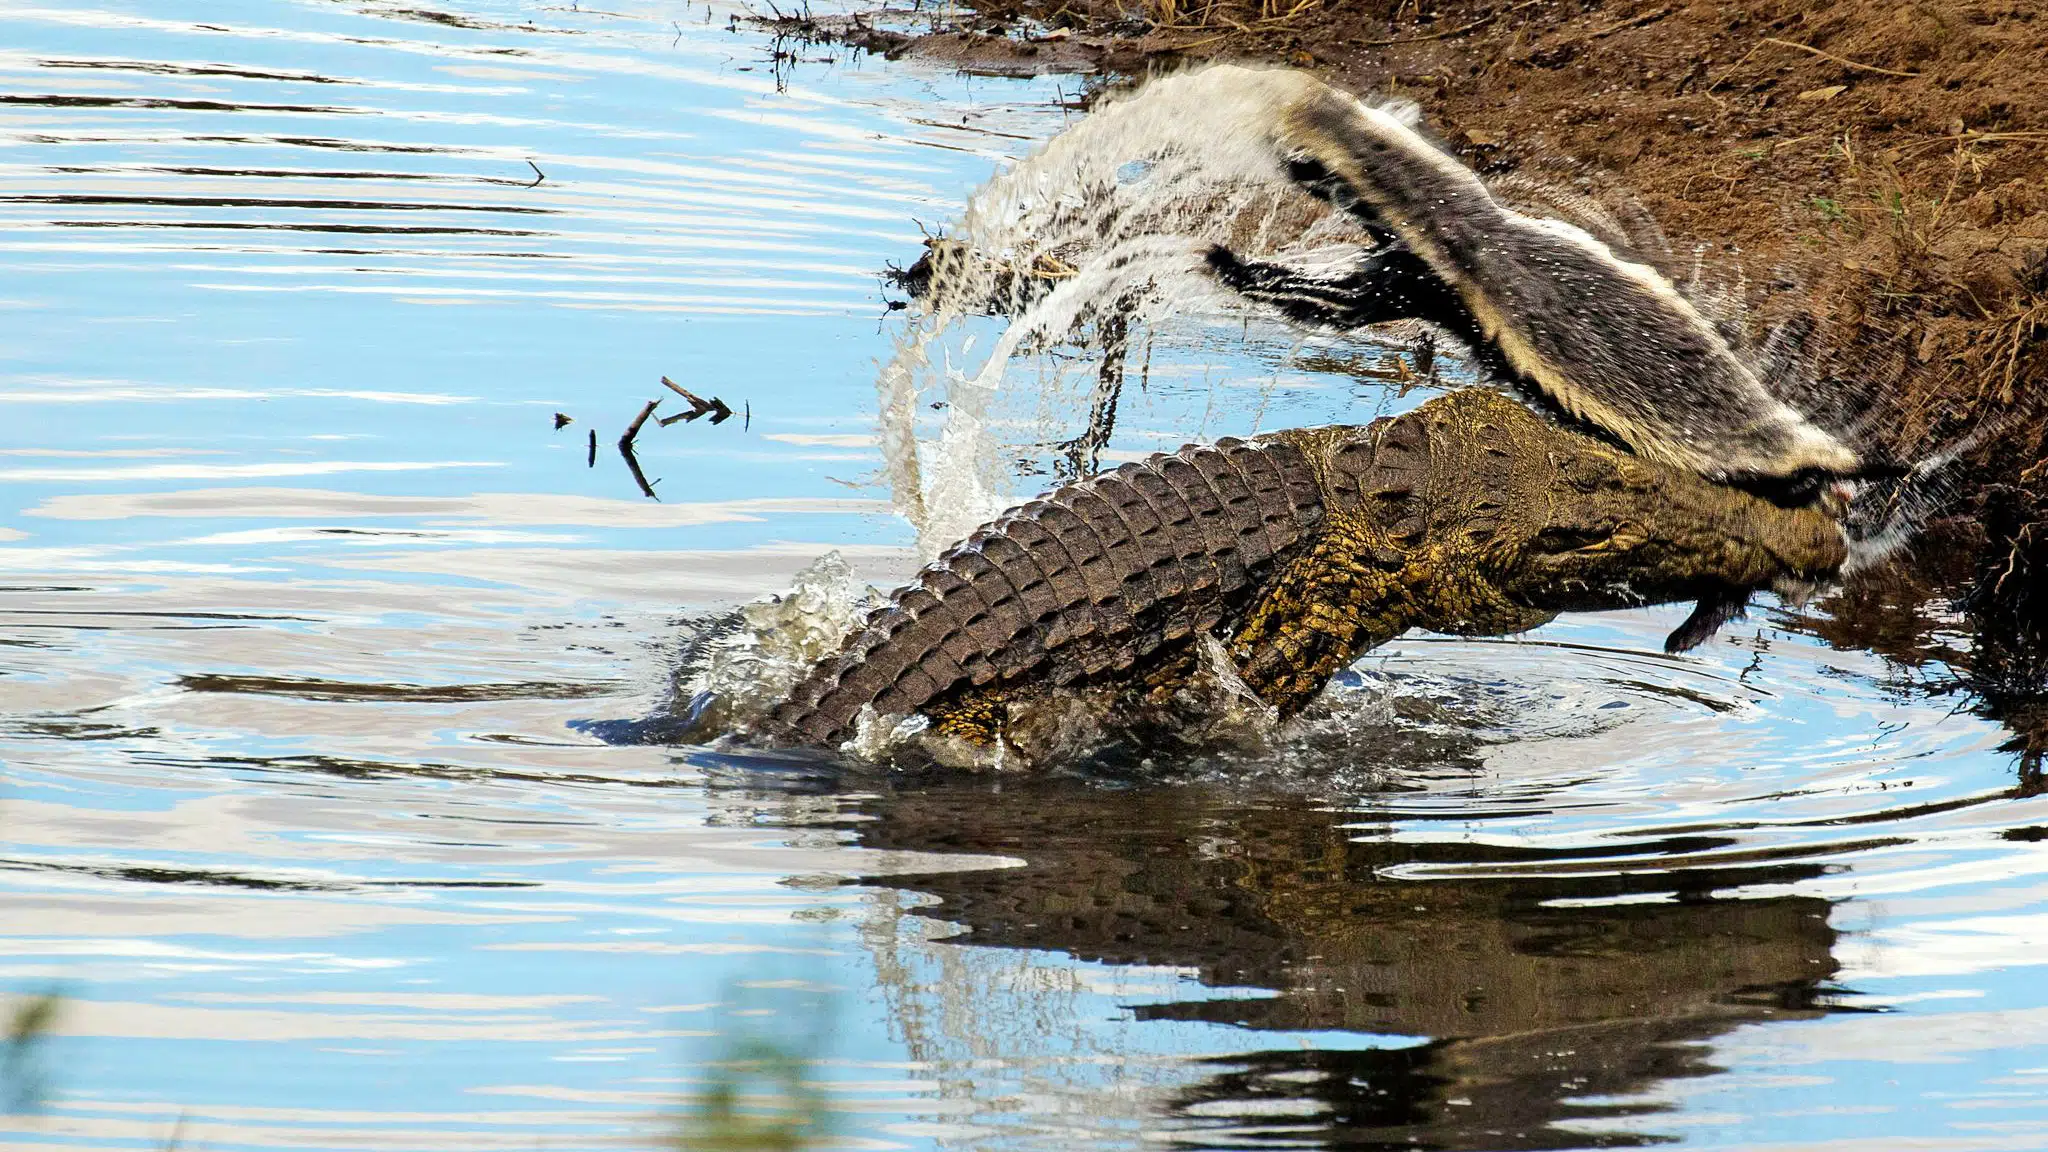 Crocodile Tries Ripping Honey Badger to Shreds